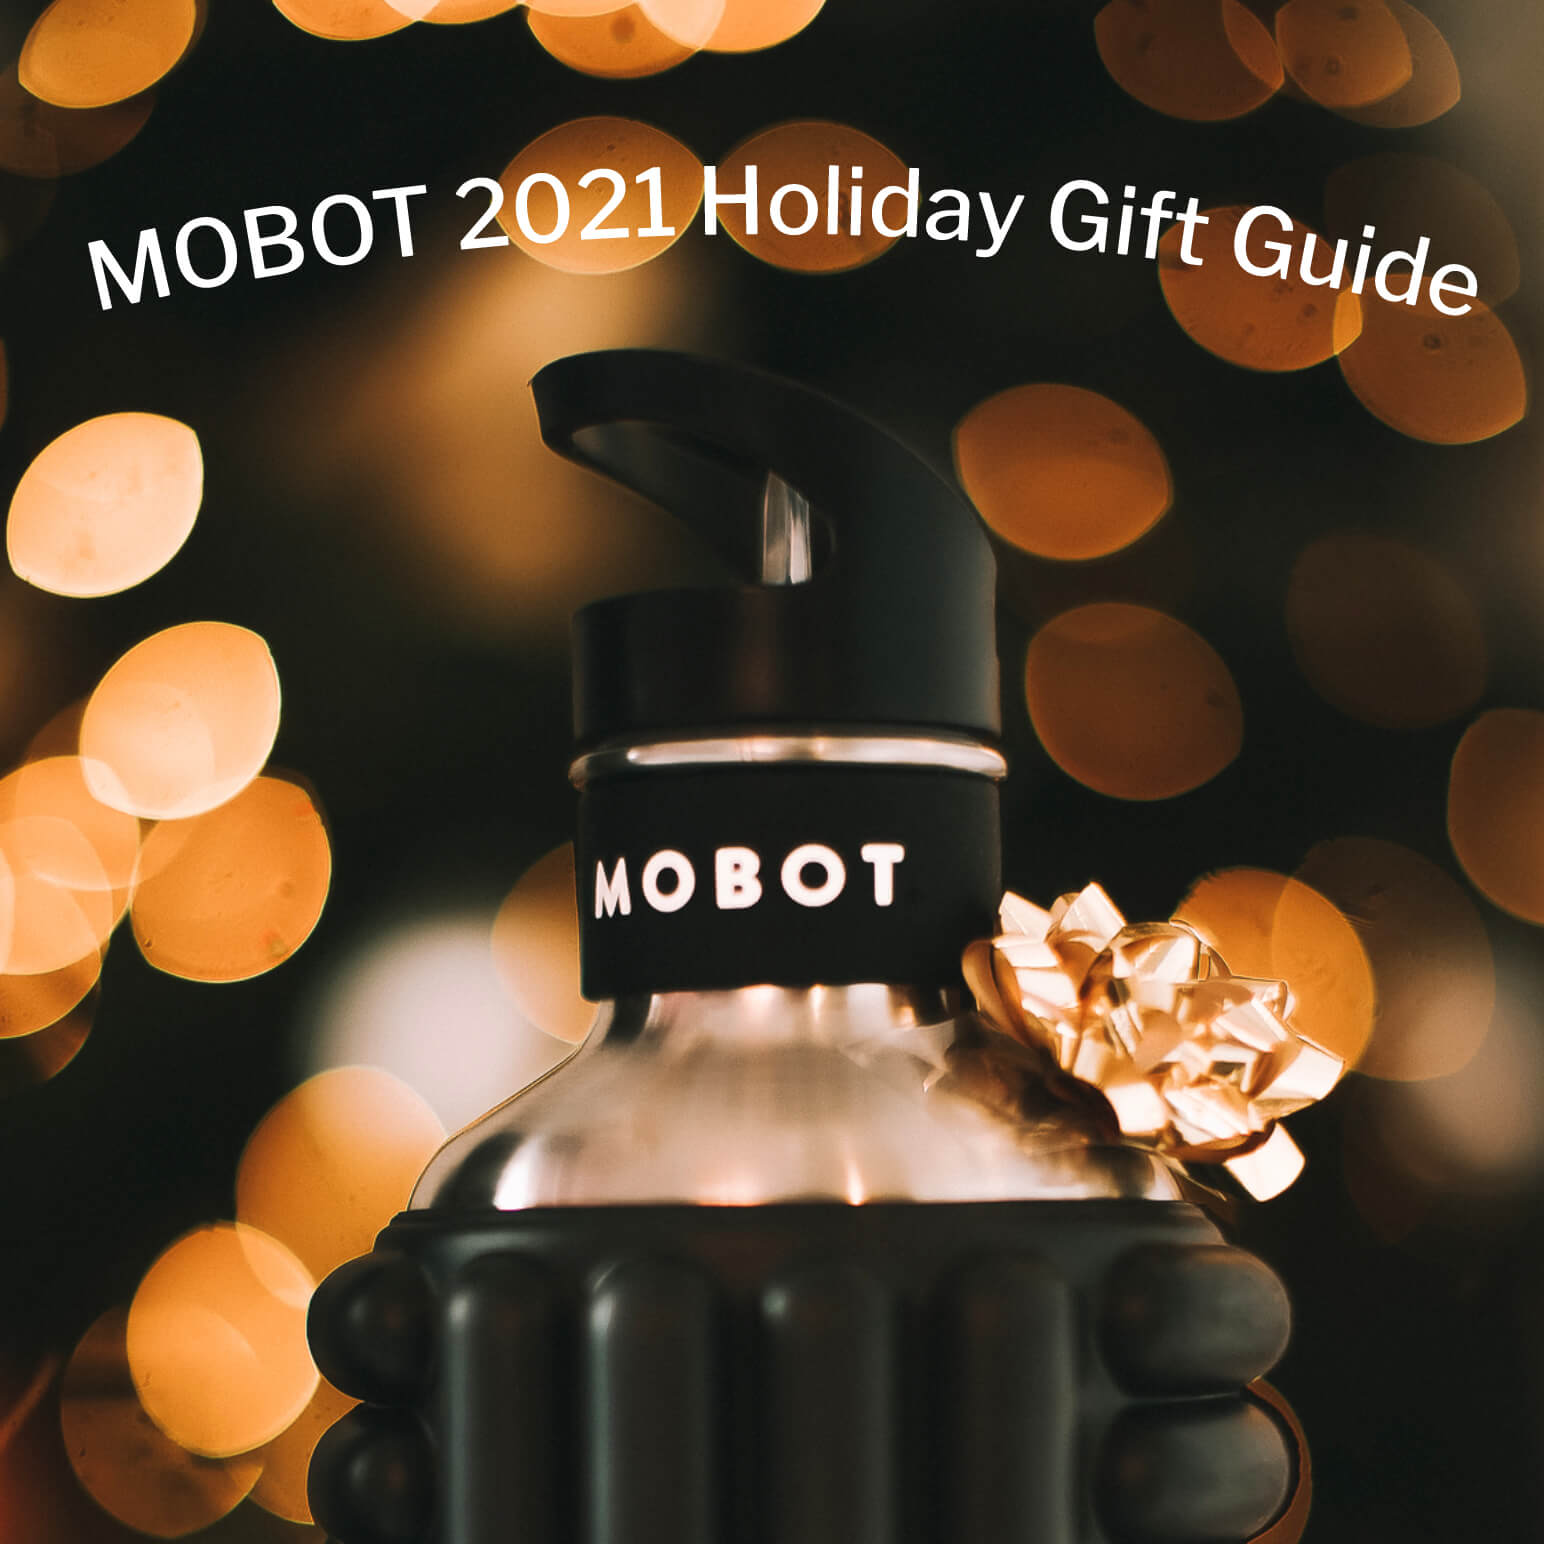 MOBOT 2021 Holiday Gift Guide